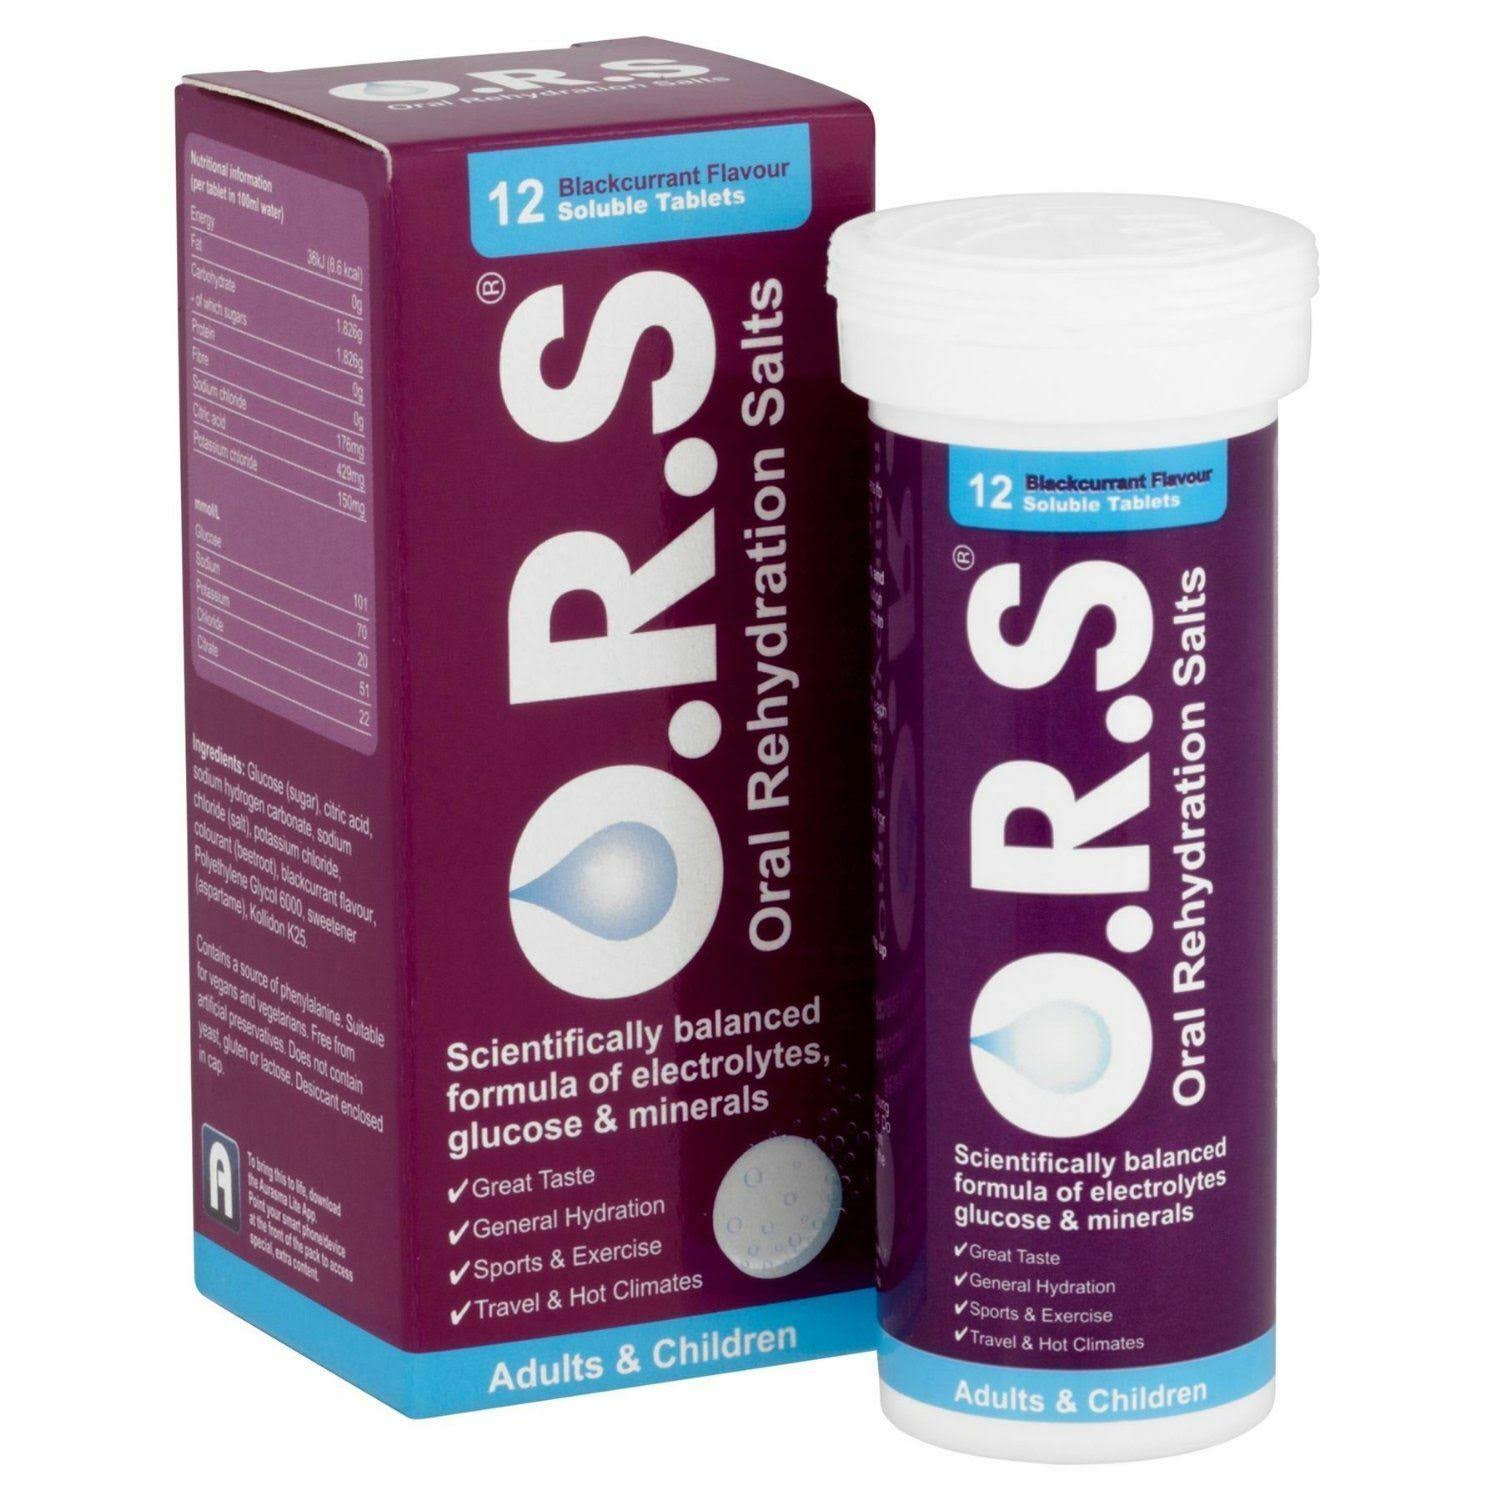 O.R.S Oral Hydration Salts - 12 Soluble Tablets, Blackcurrant